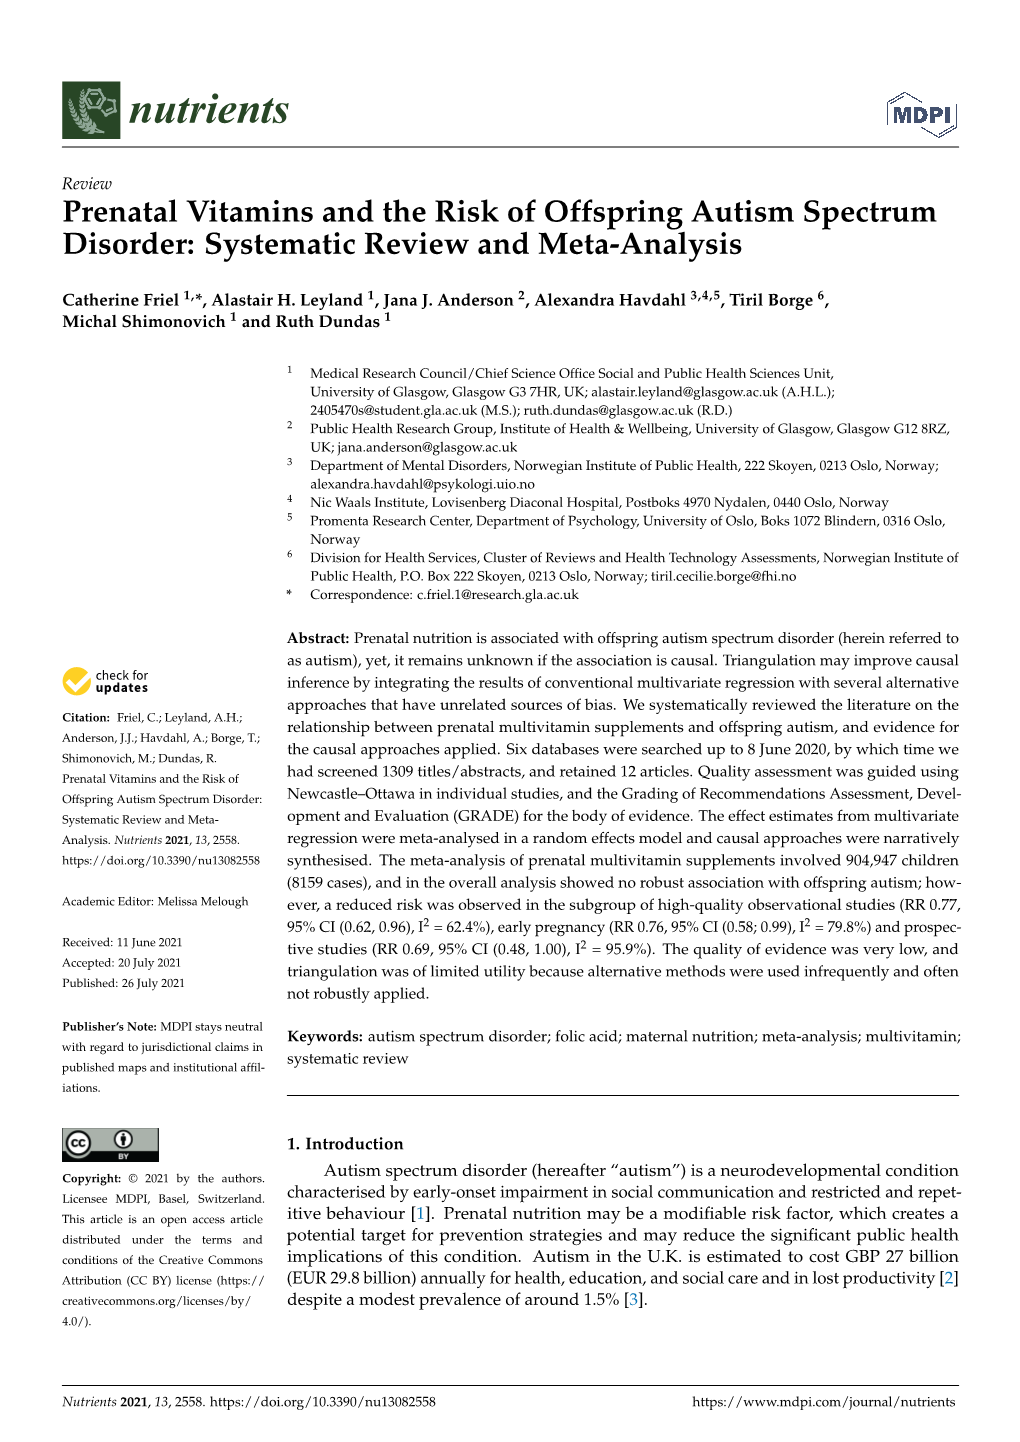 Prenatal Vitamins and the Risk of Offspring Autism Spectrum Disorder: Systematic Review and Meta-Analysis